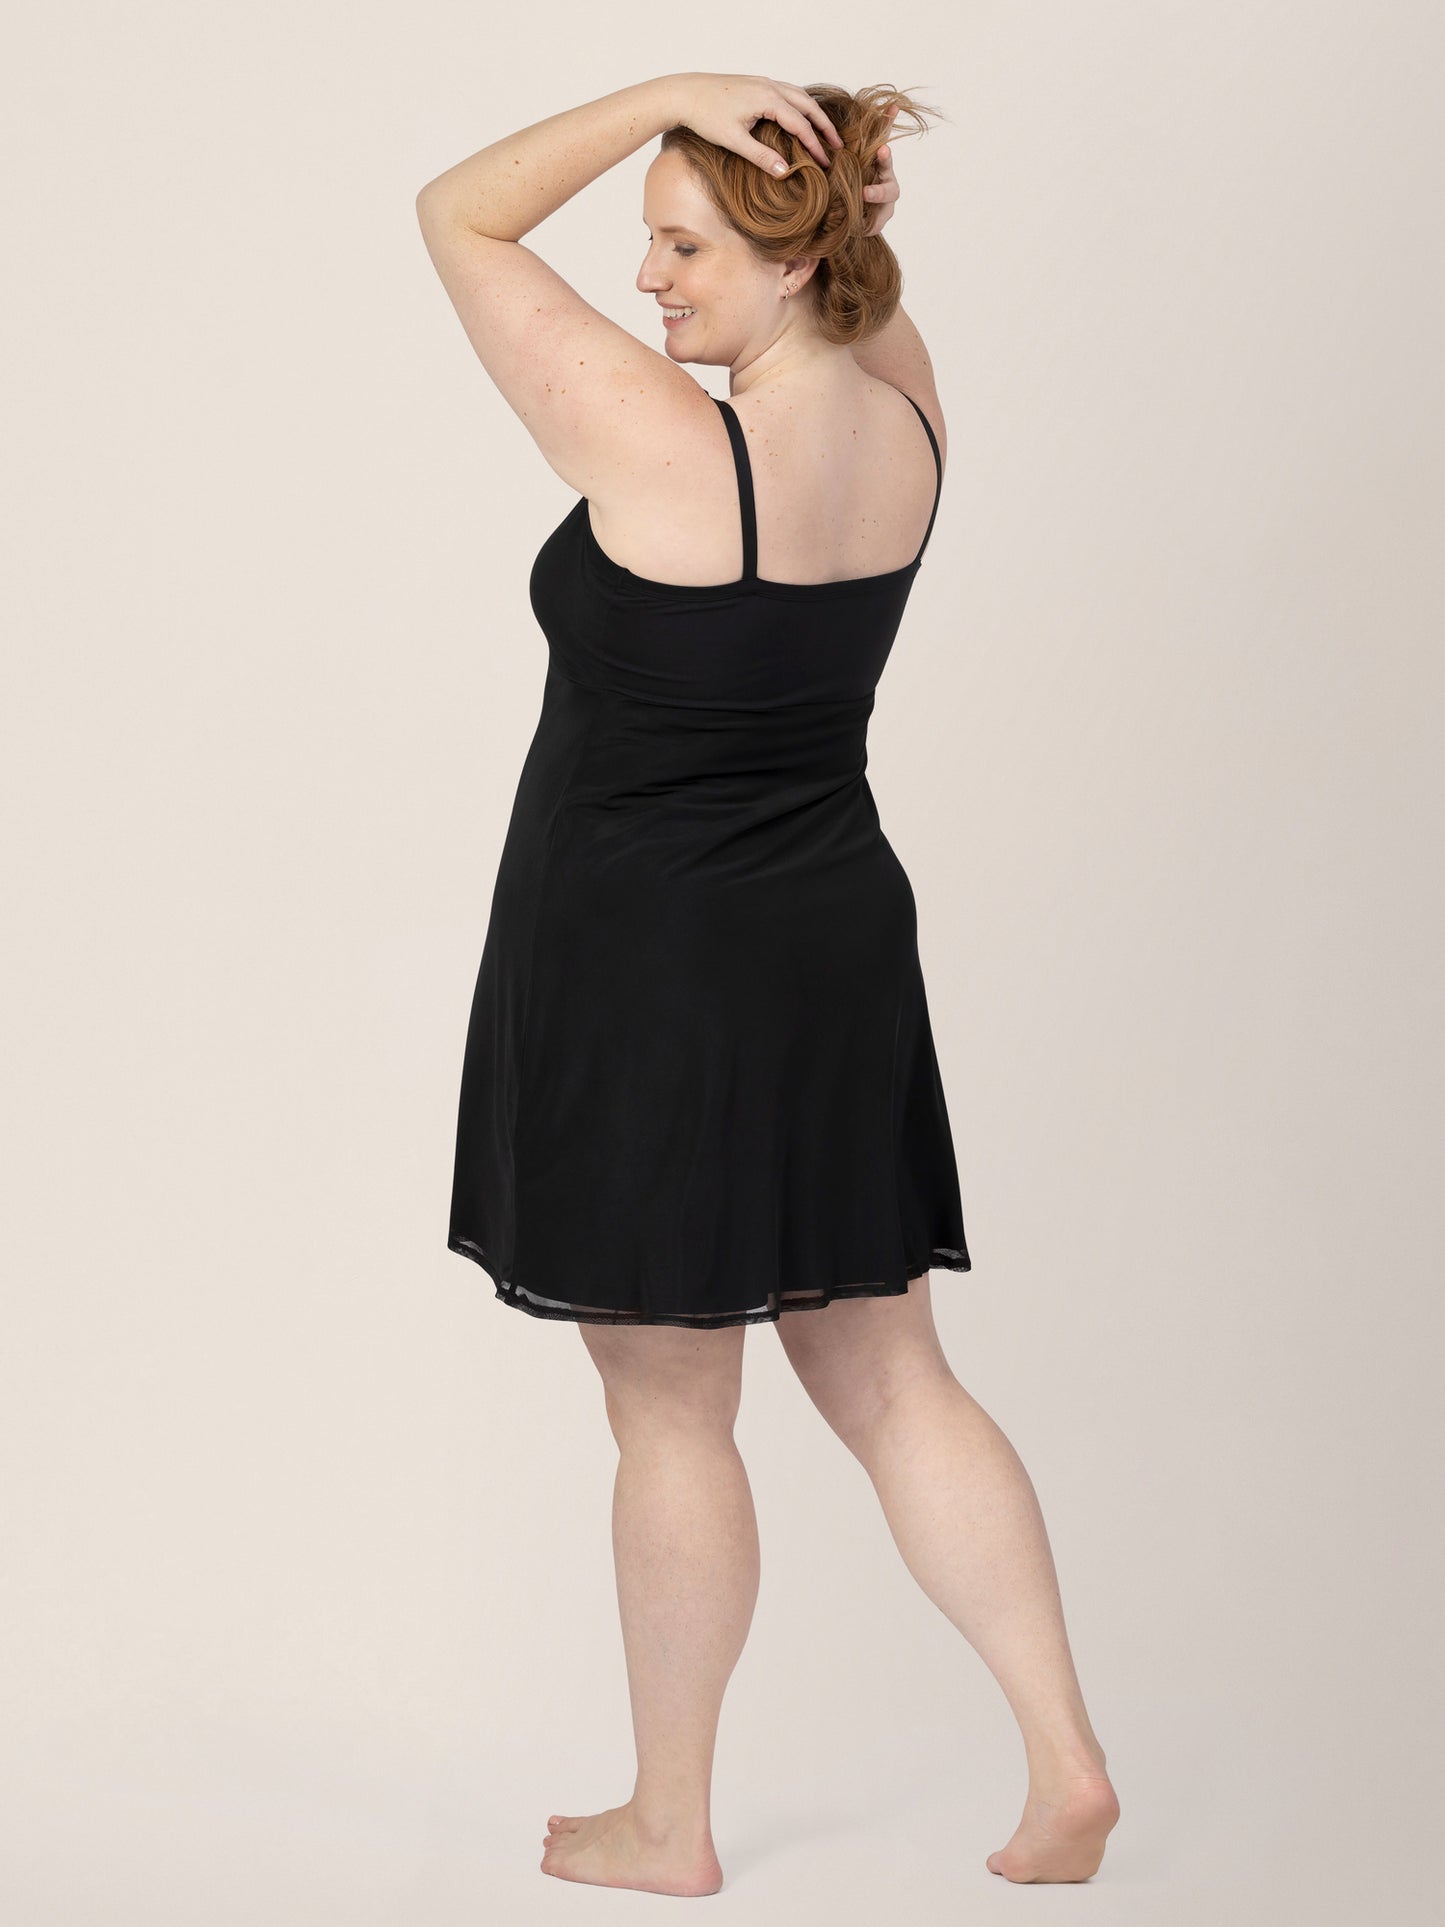 Angled back view of model wearing the Aurora Mesh Nursing Nightgown in black, holding hair up.